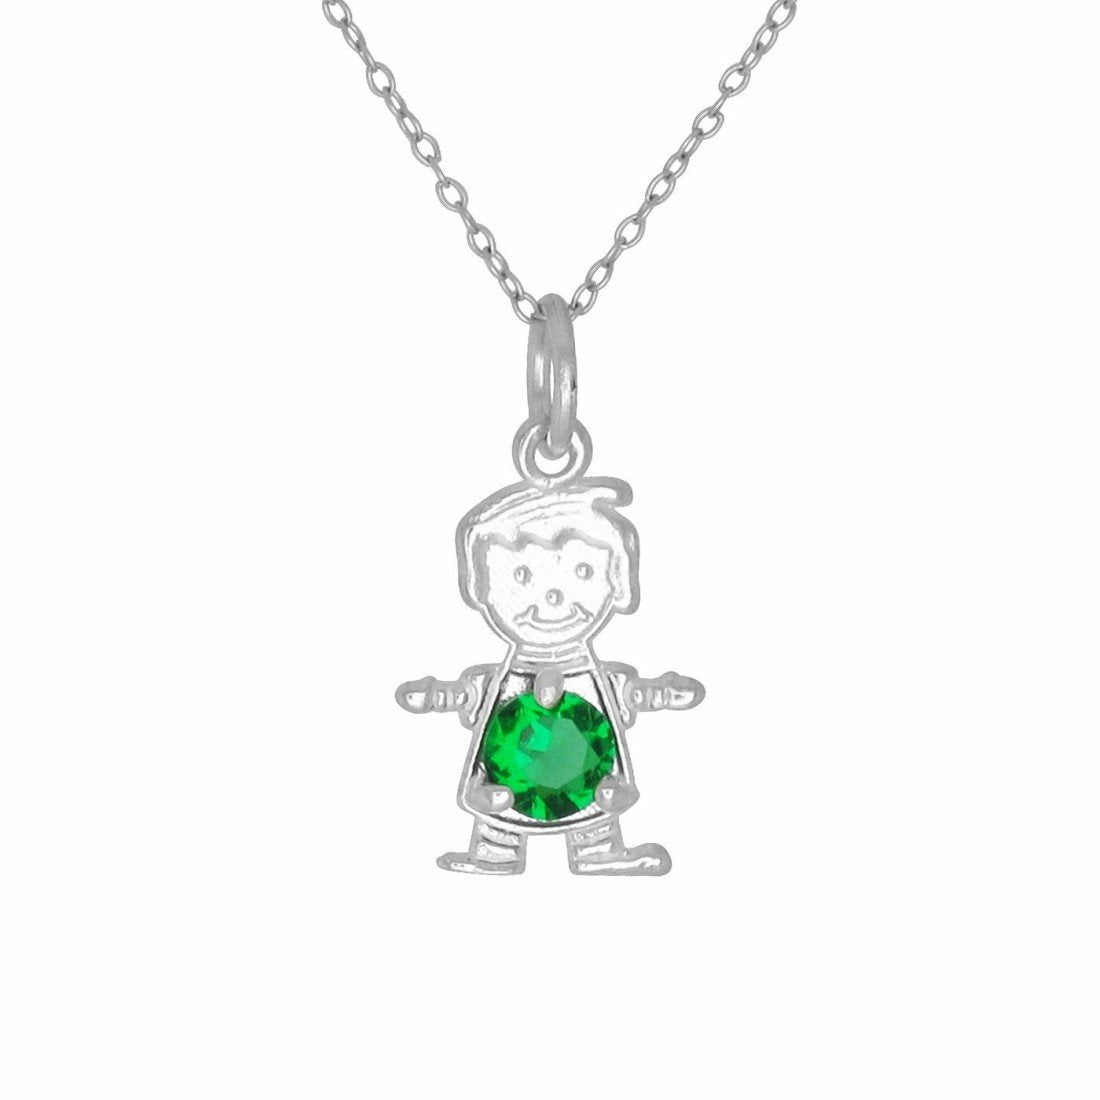 Baby Charm Pendant Round Cubic Zirconia 925 Sterling Silver Happy Baby Boy